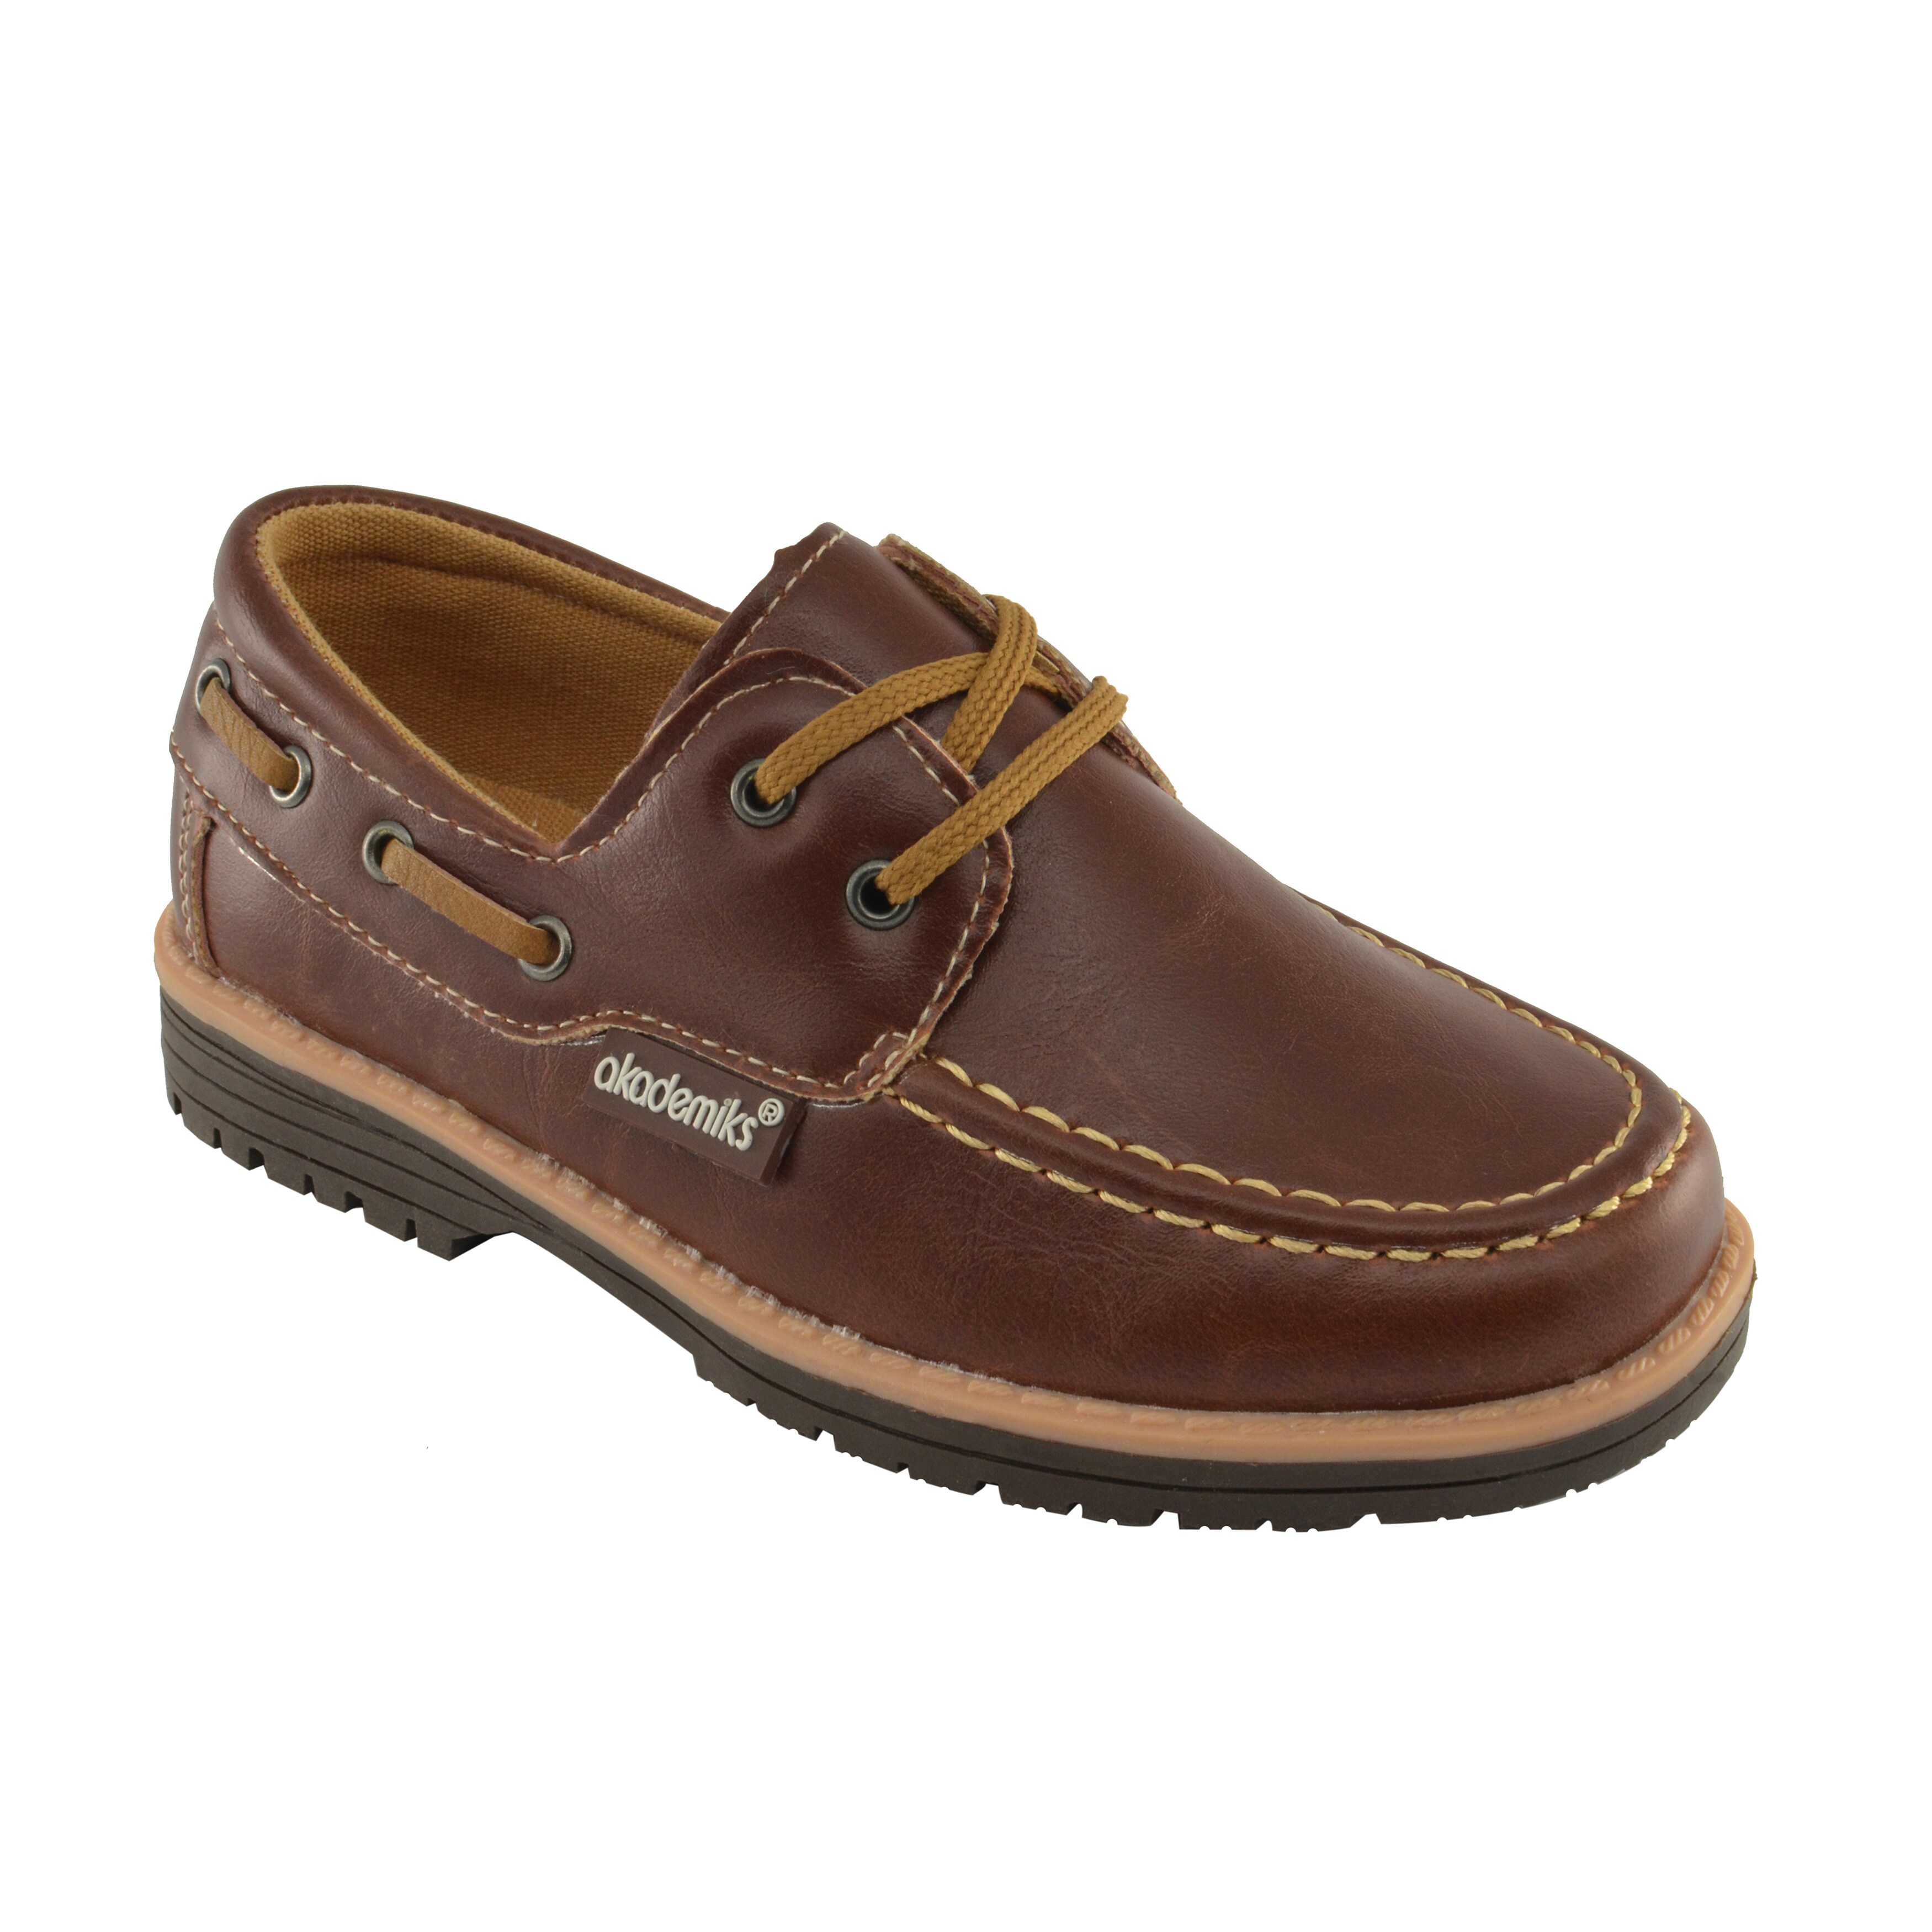 Shop Akademiks Boys' Boat Shoes - Free Shipping On Orders Over $45 ...